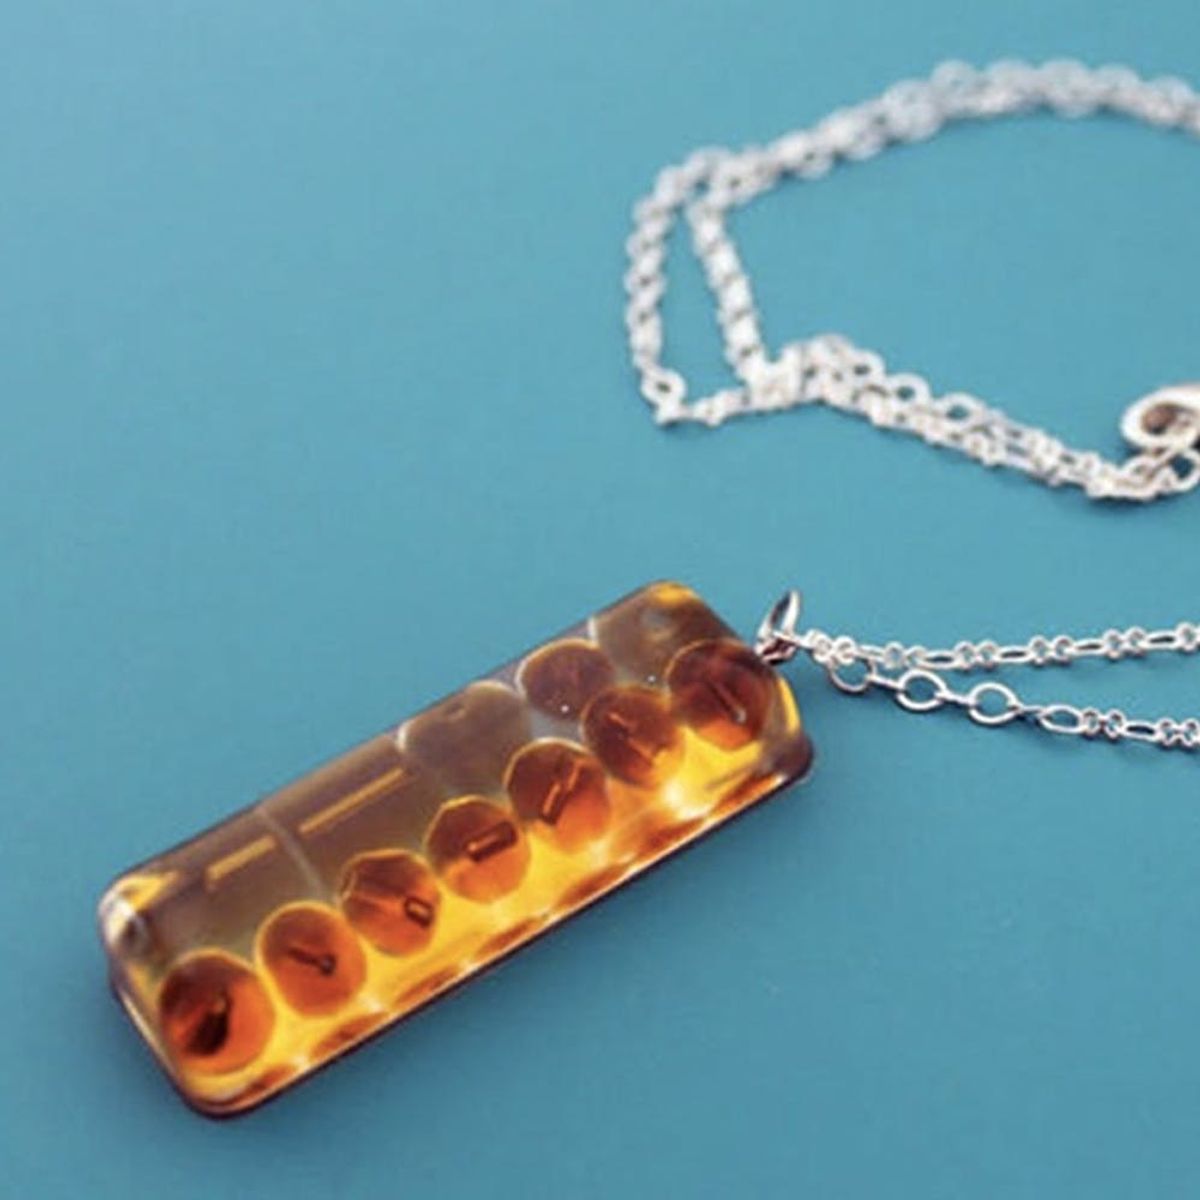 Close-up view of amber resin jewelry pendant on a silver chain